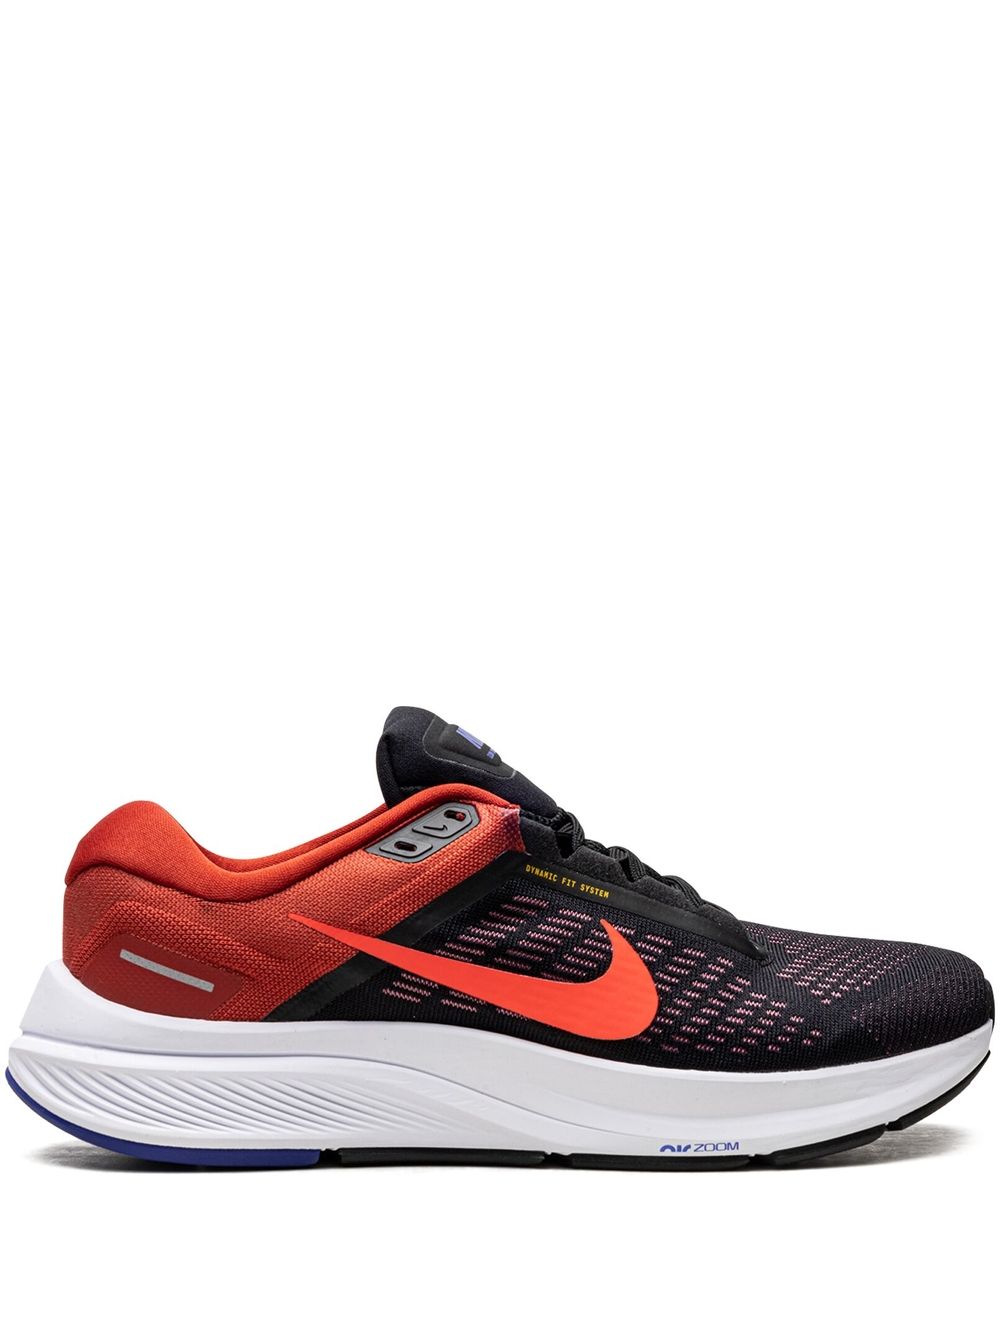 Nike Air Zoom Structure 24 Low-top Sneakers In Black/cinnabar/concord/bright Crimson